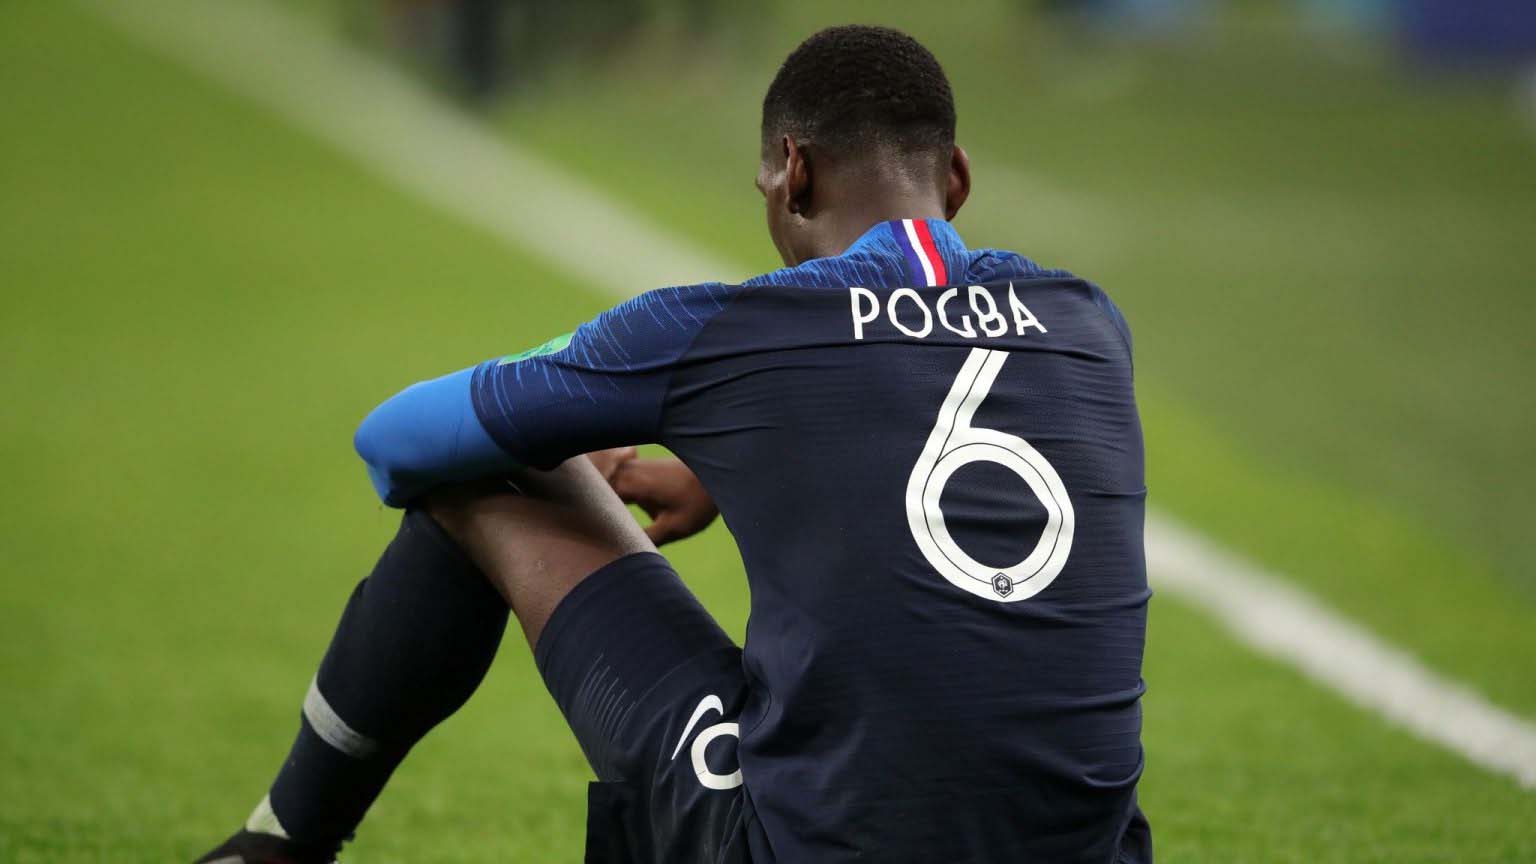 France midfielder Pogba to miss World Cup due to knee surgery